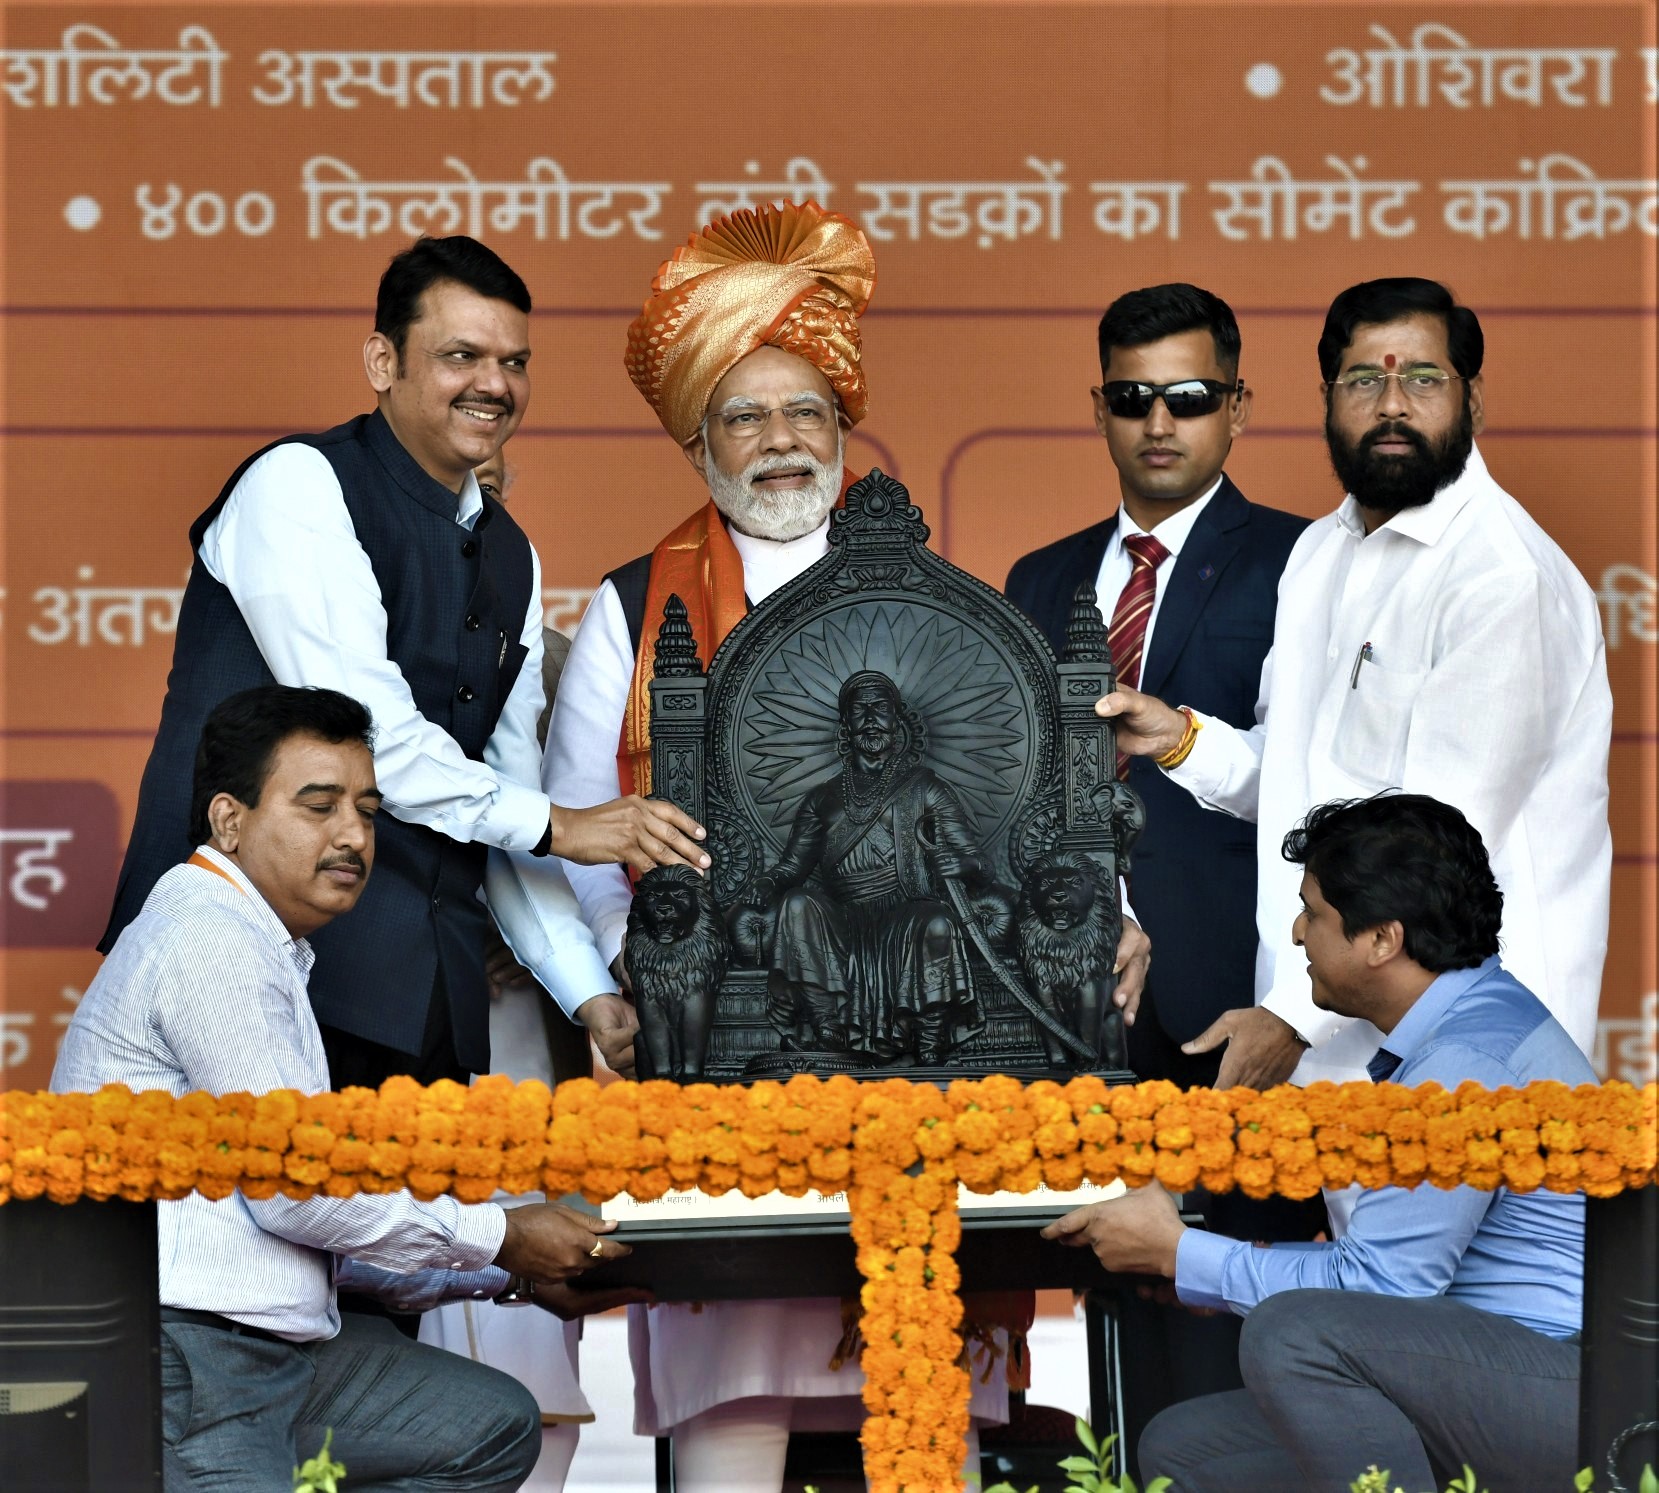 PM at the launch of the development projects and transfers benefits under PM-SVANidhi, in Mumbai, Maharashtra on January 19, 2023.